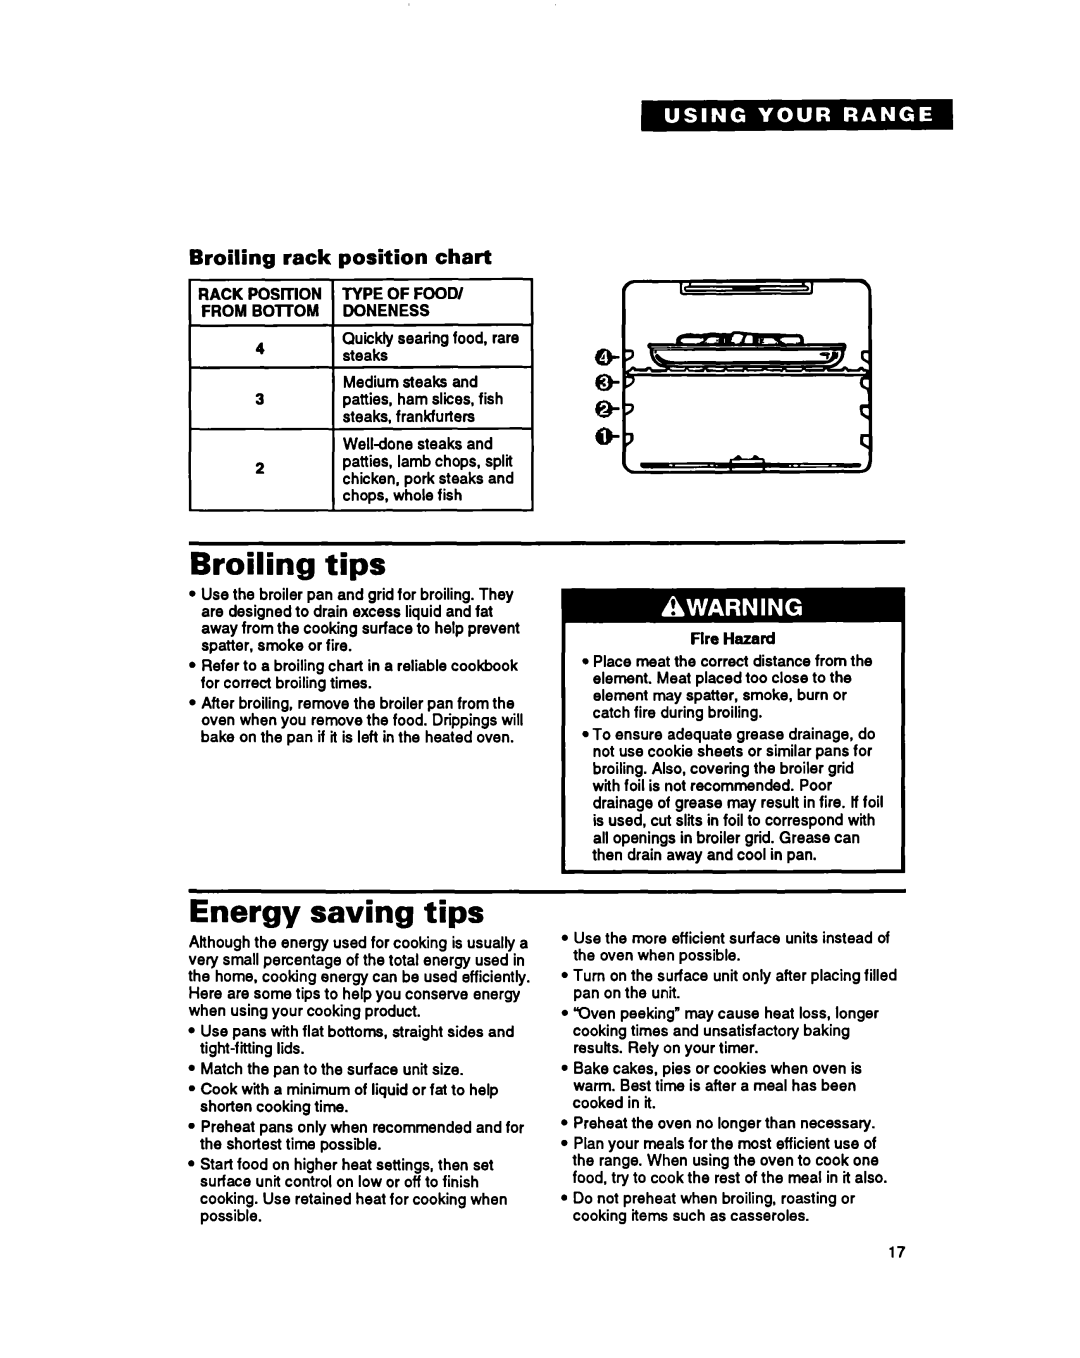 Whirlpool RF396PCY, RF396PXY manual Broiling tips, Energy saving tips, Broiling rack position chart 